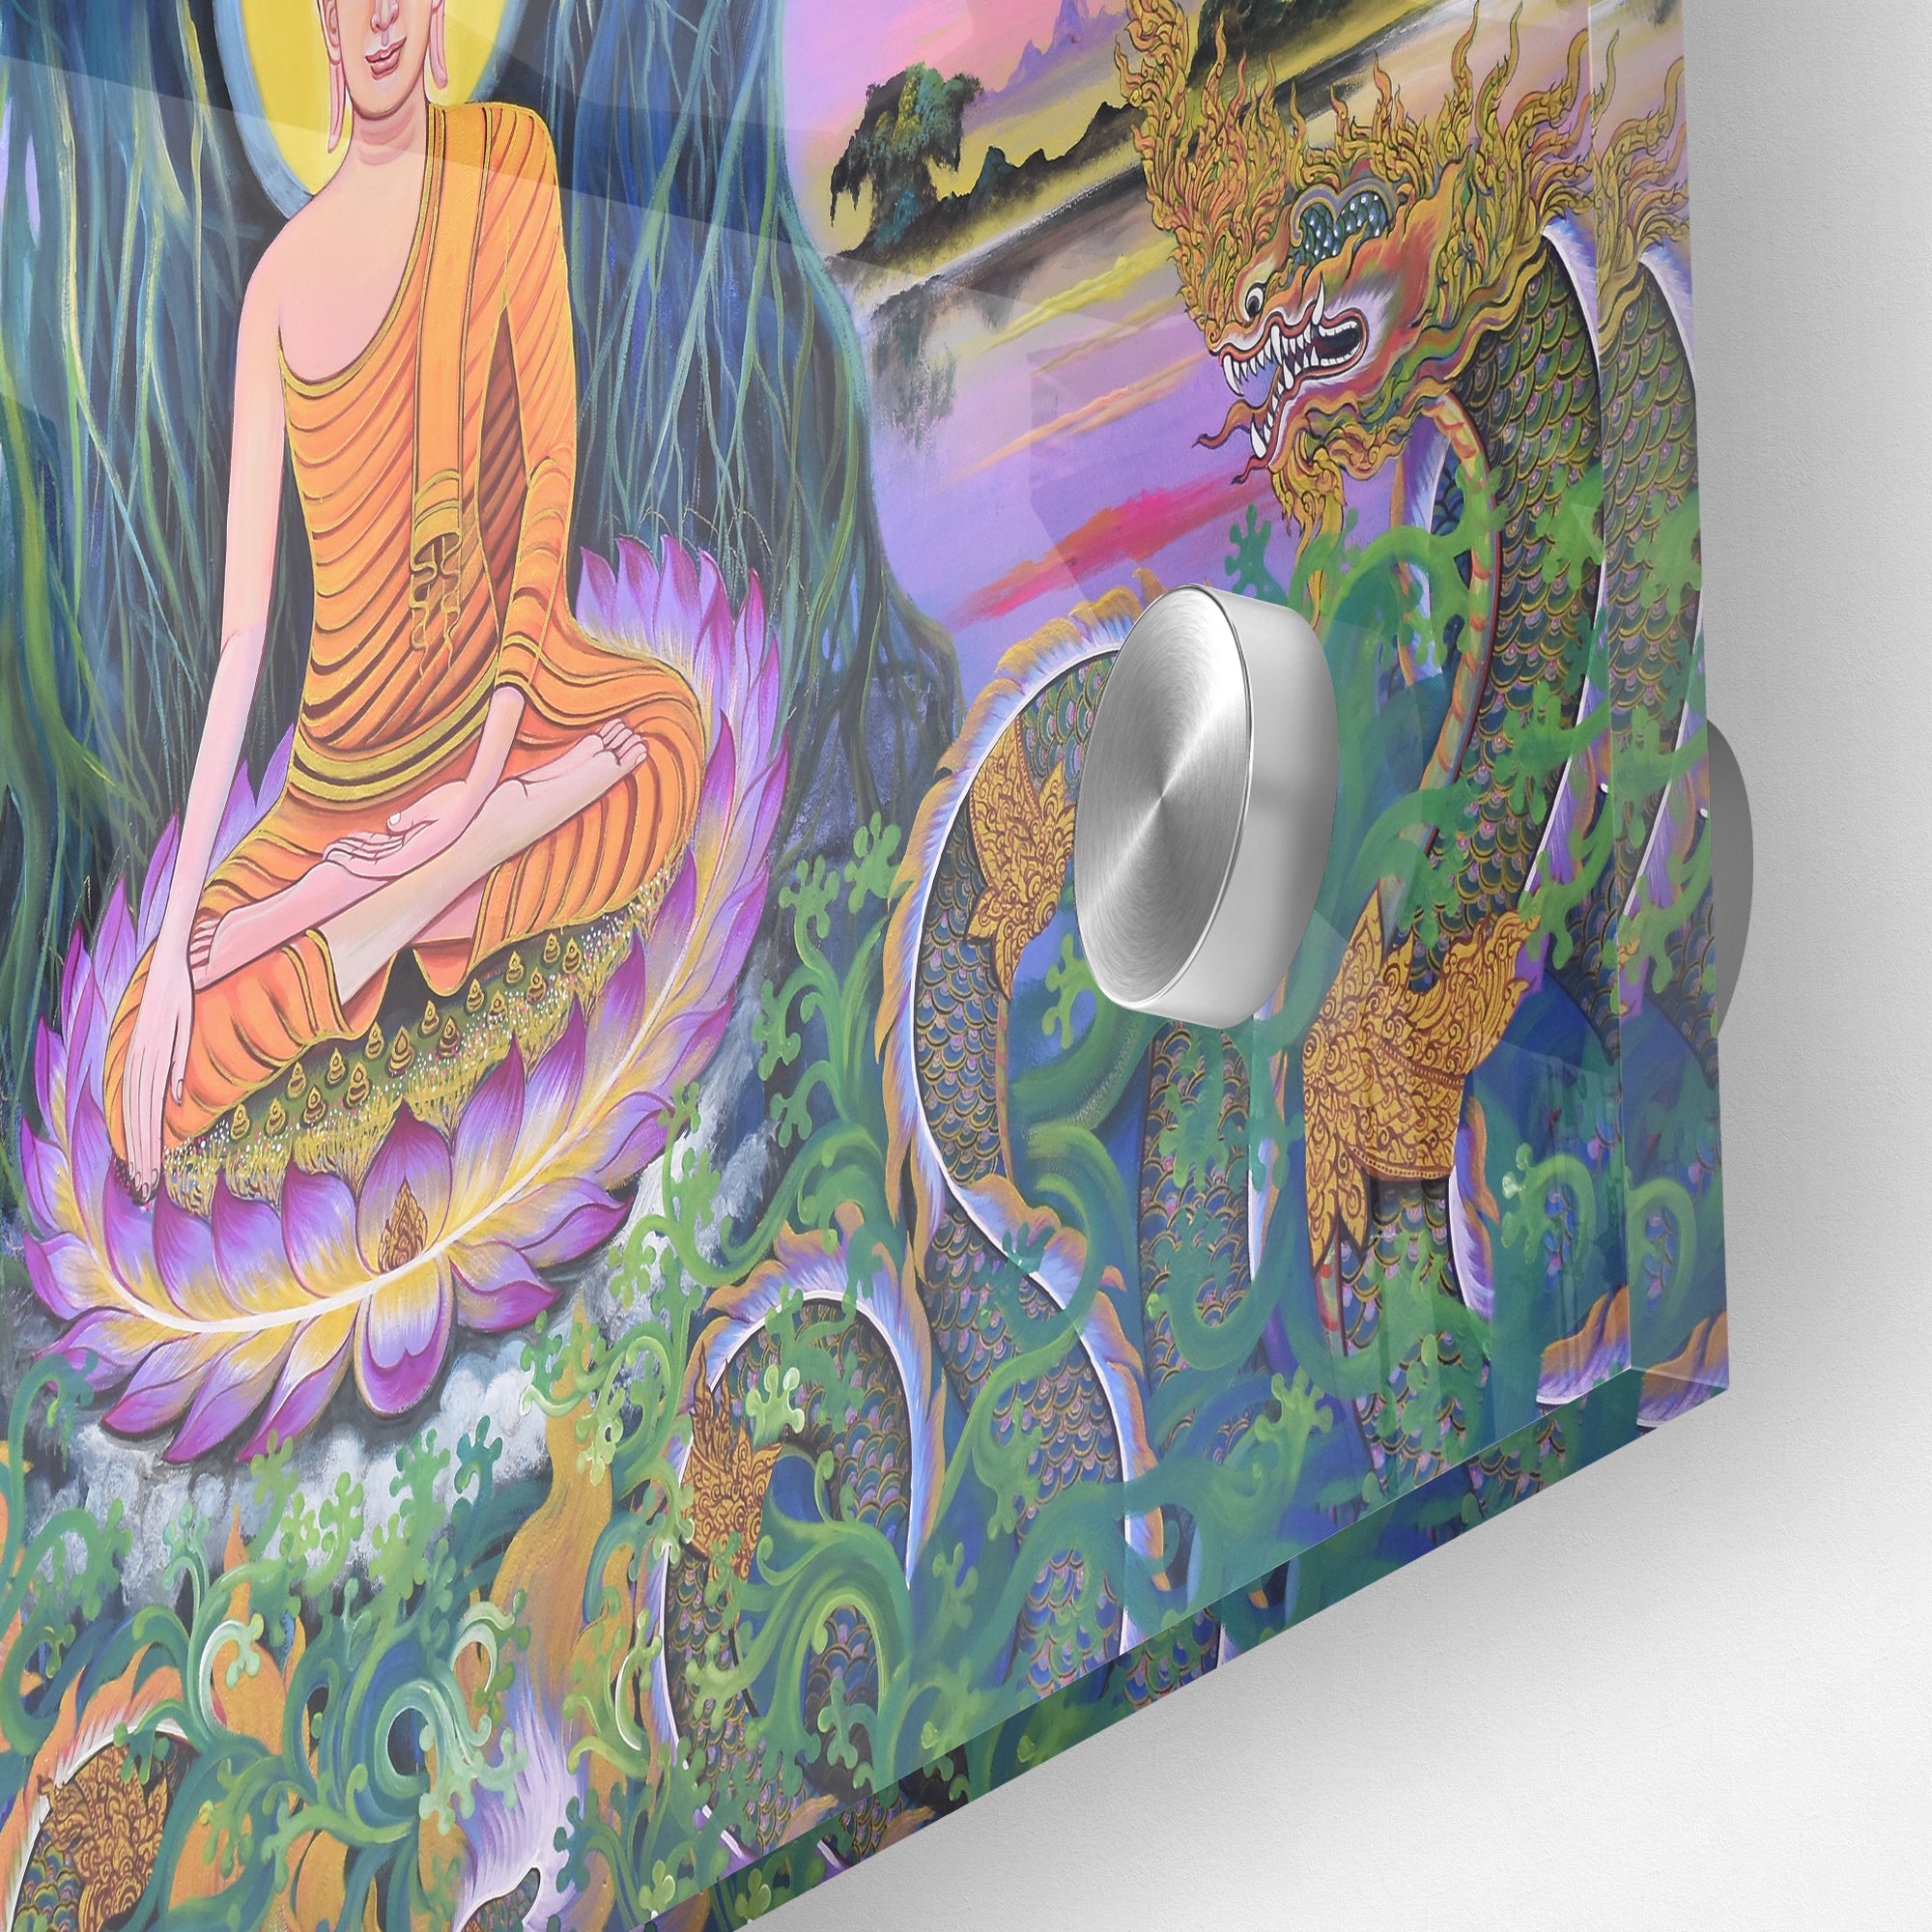 Lord Buddha And Snakes Acrylic Wall Painting